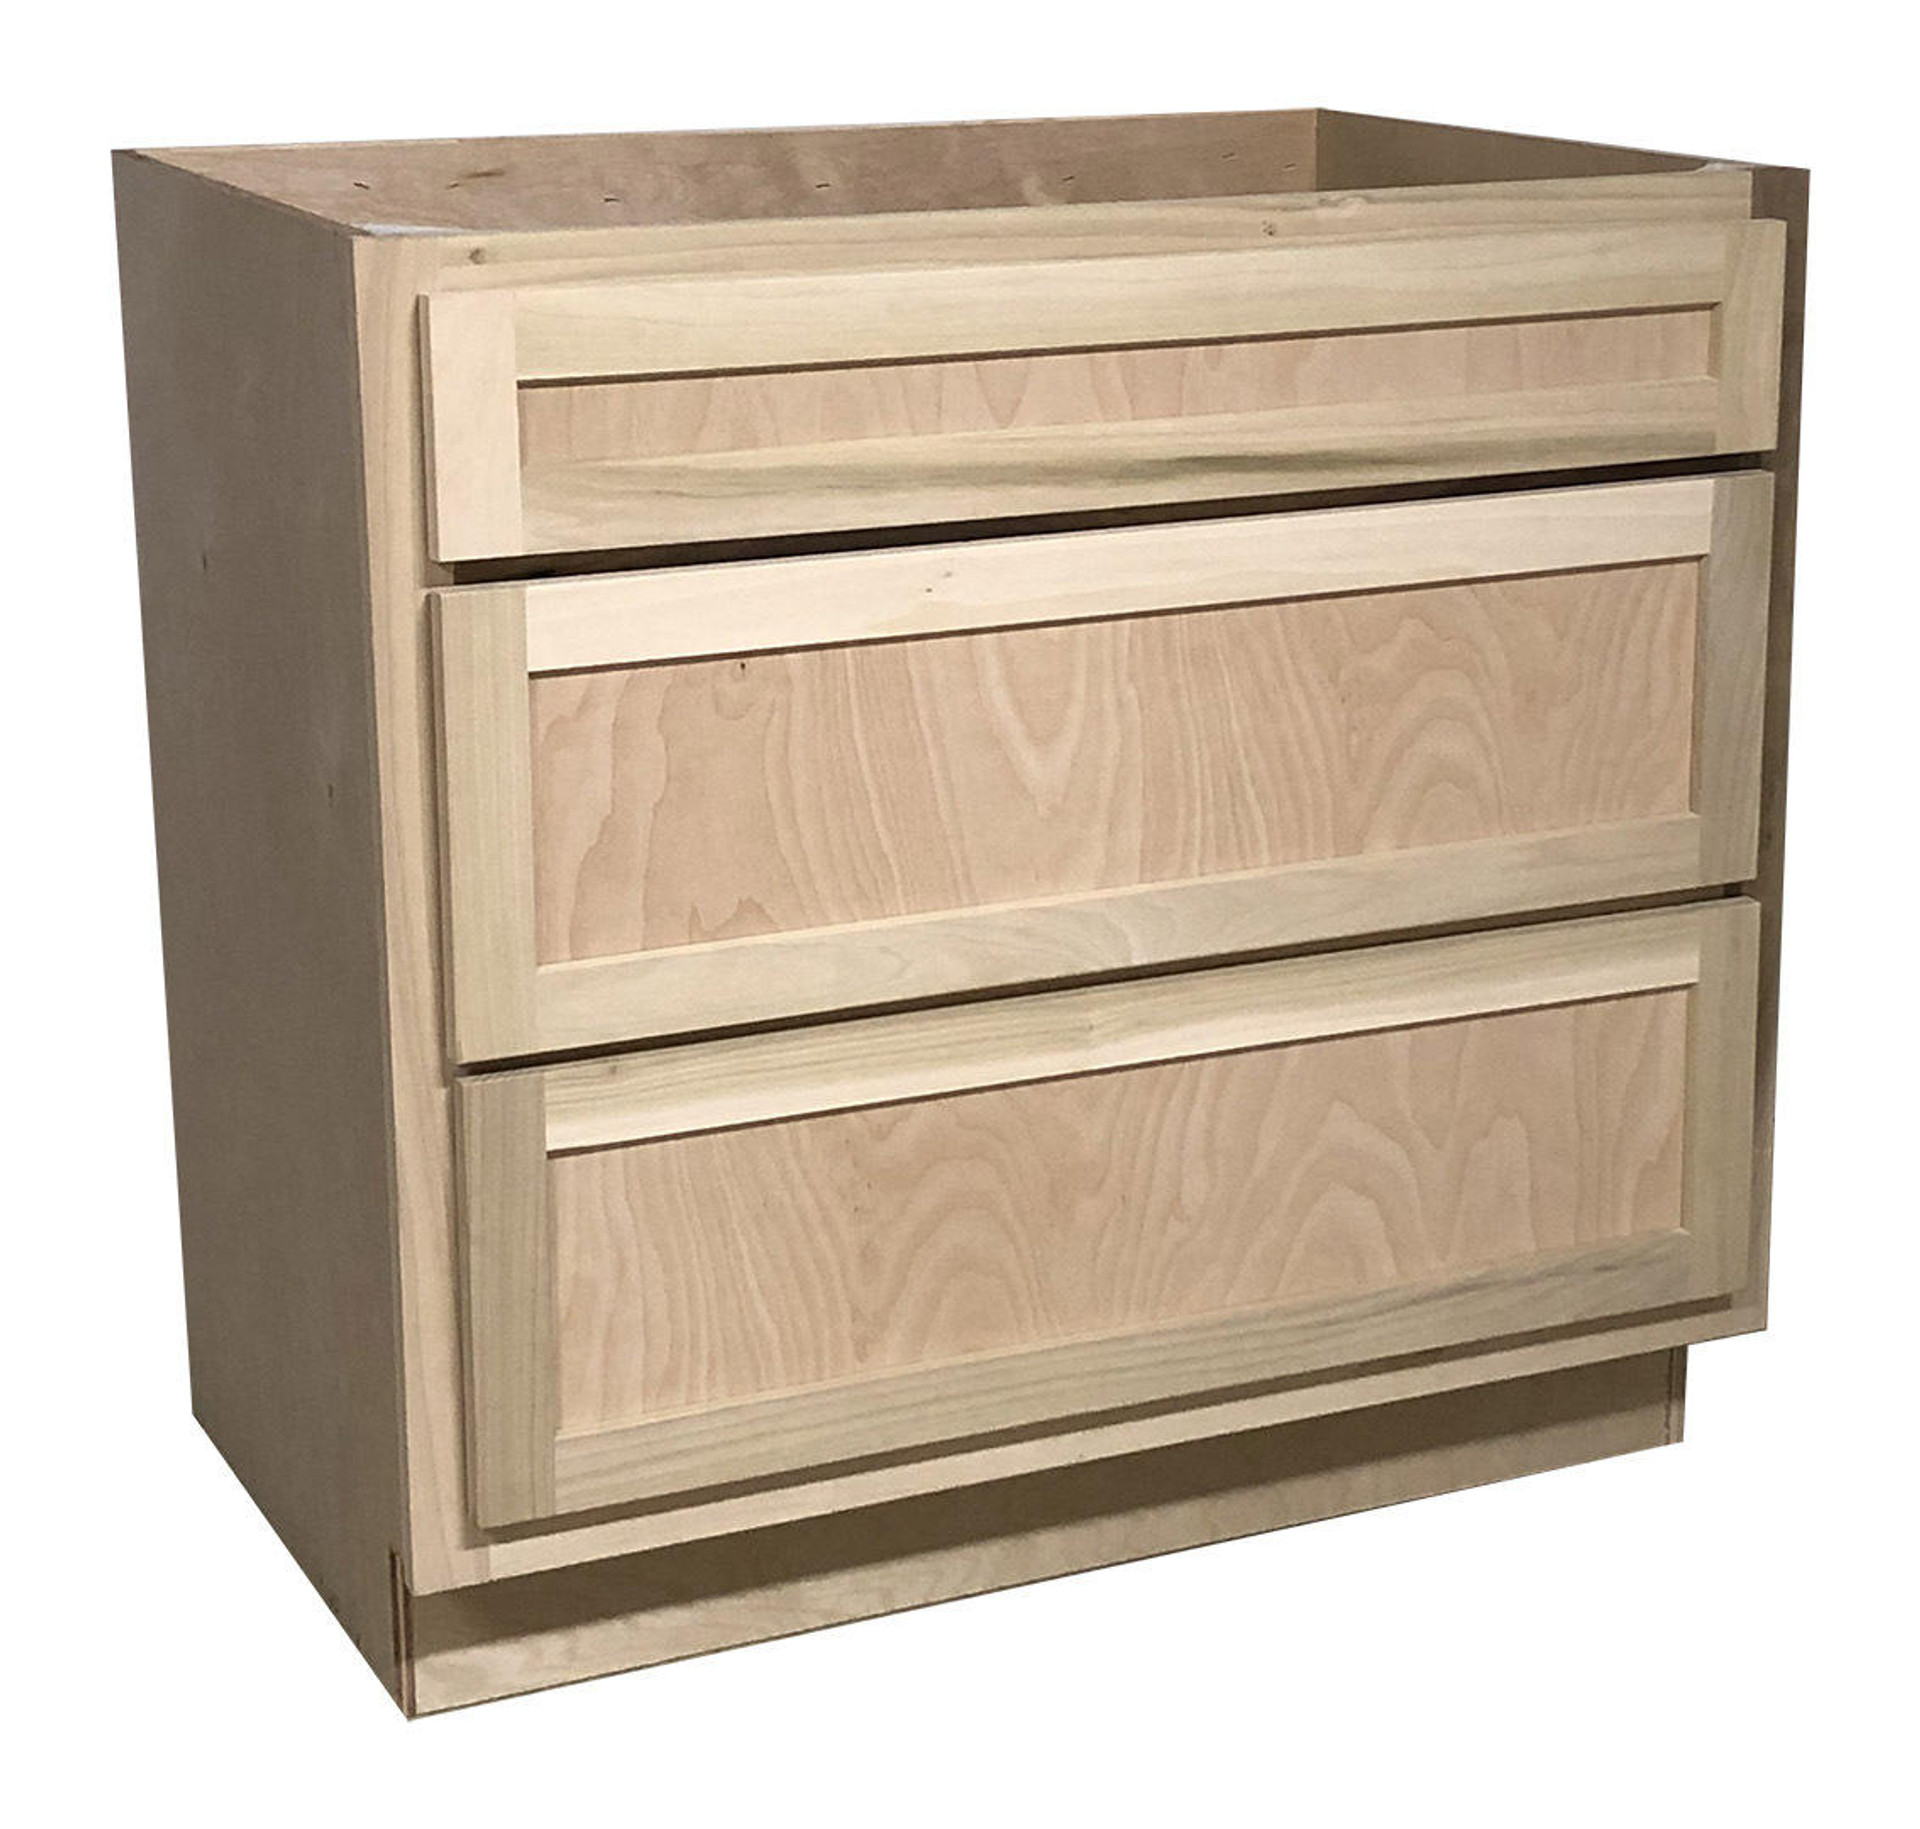 Kitchen Drawer Base Cabinet Or Unfinished Poplar Or Shaker Style Or 36 In Or 3 Drawer  23743.1659721953 ?c=2